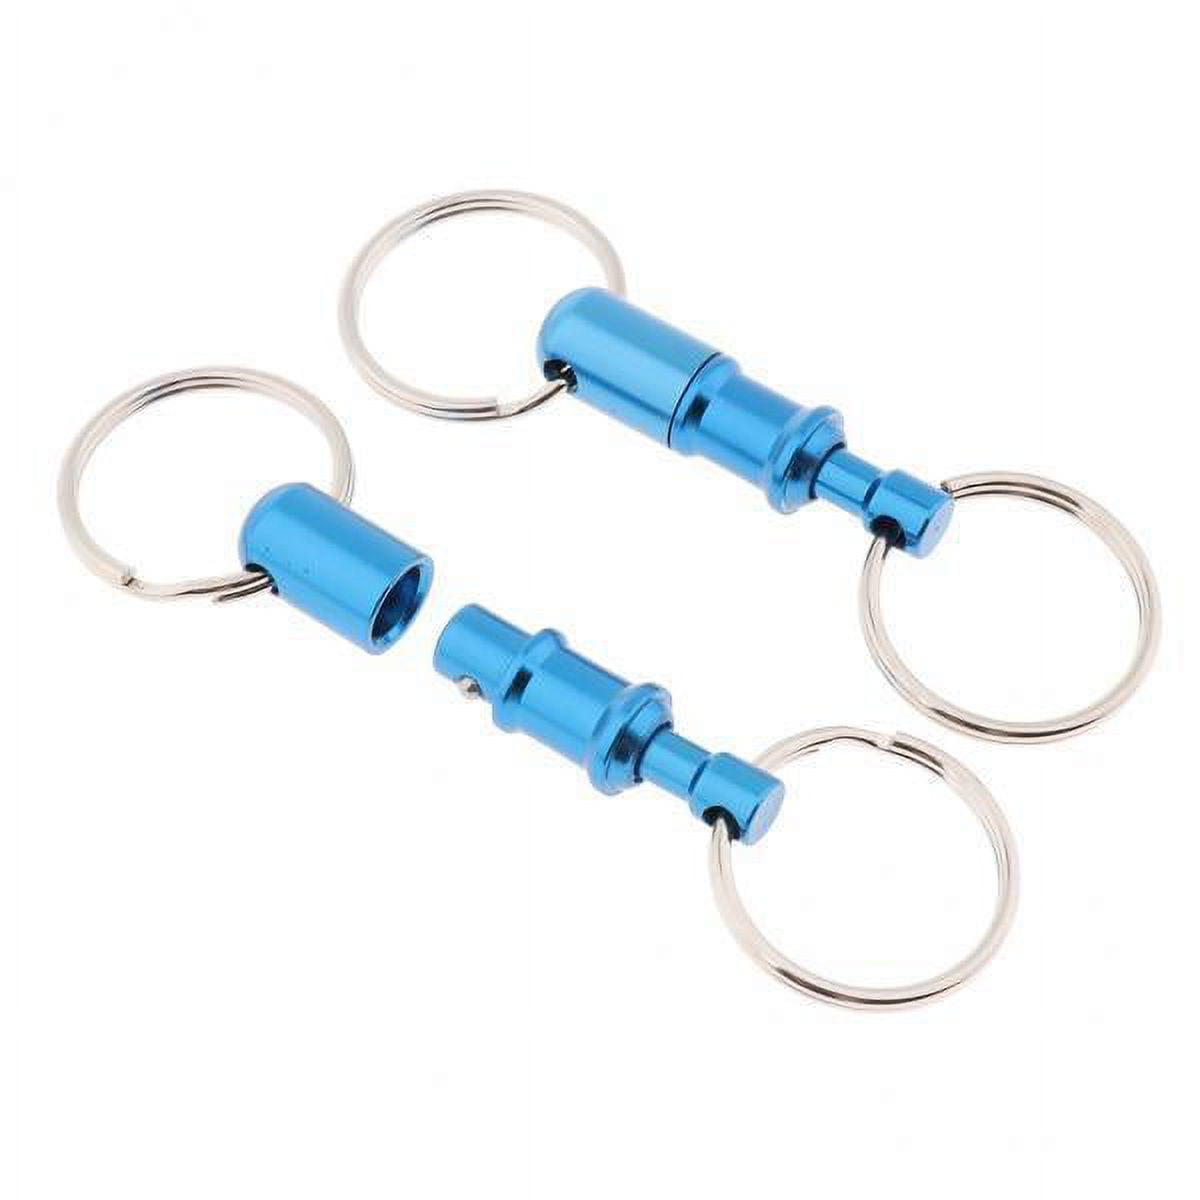 BESYL Commerce Keychain with 2 Key Rings, Office and School Heavy Duty Car  Key Chain for Men and Women.